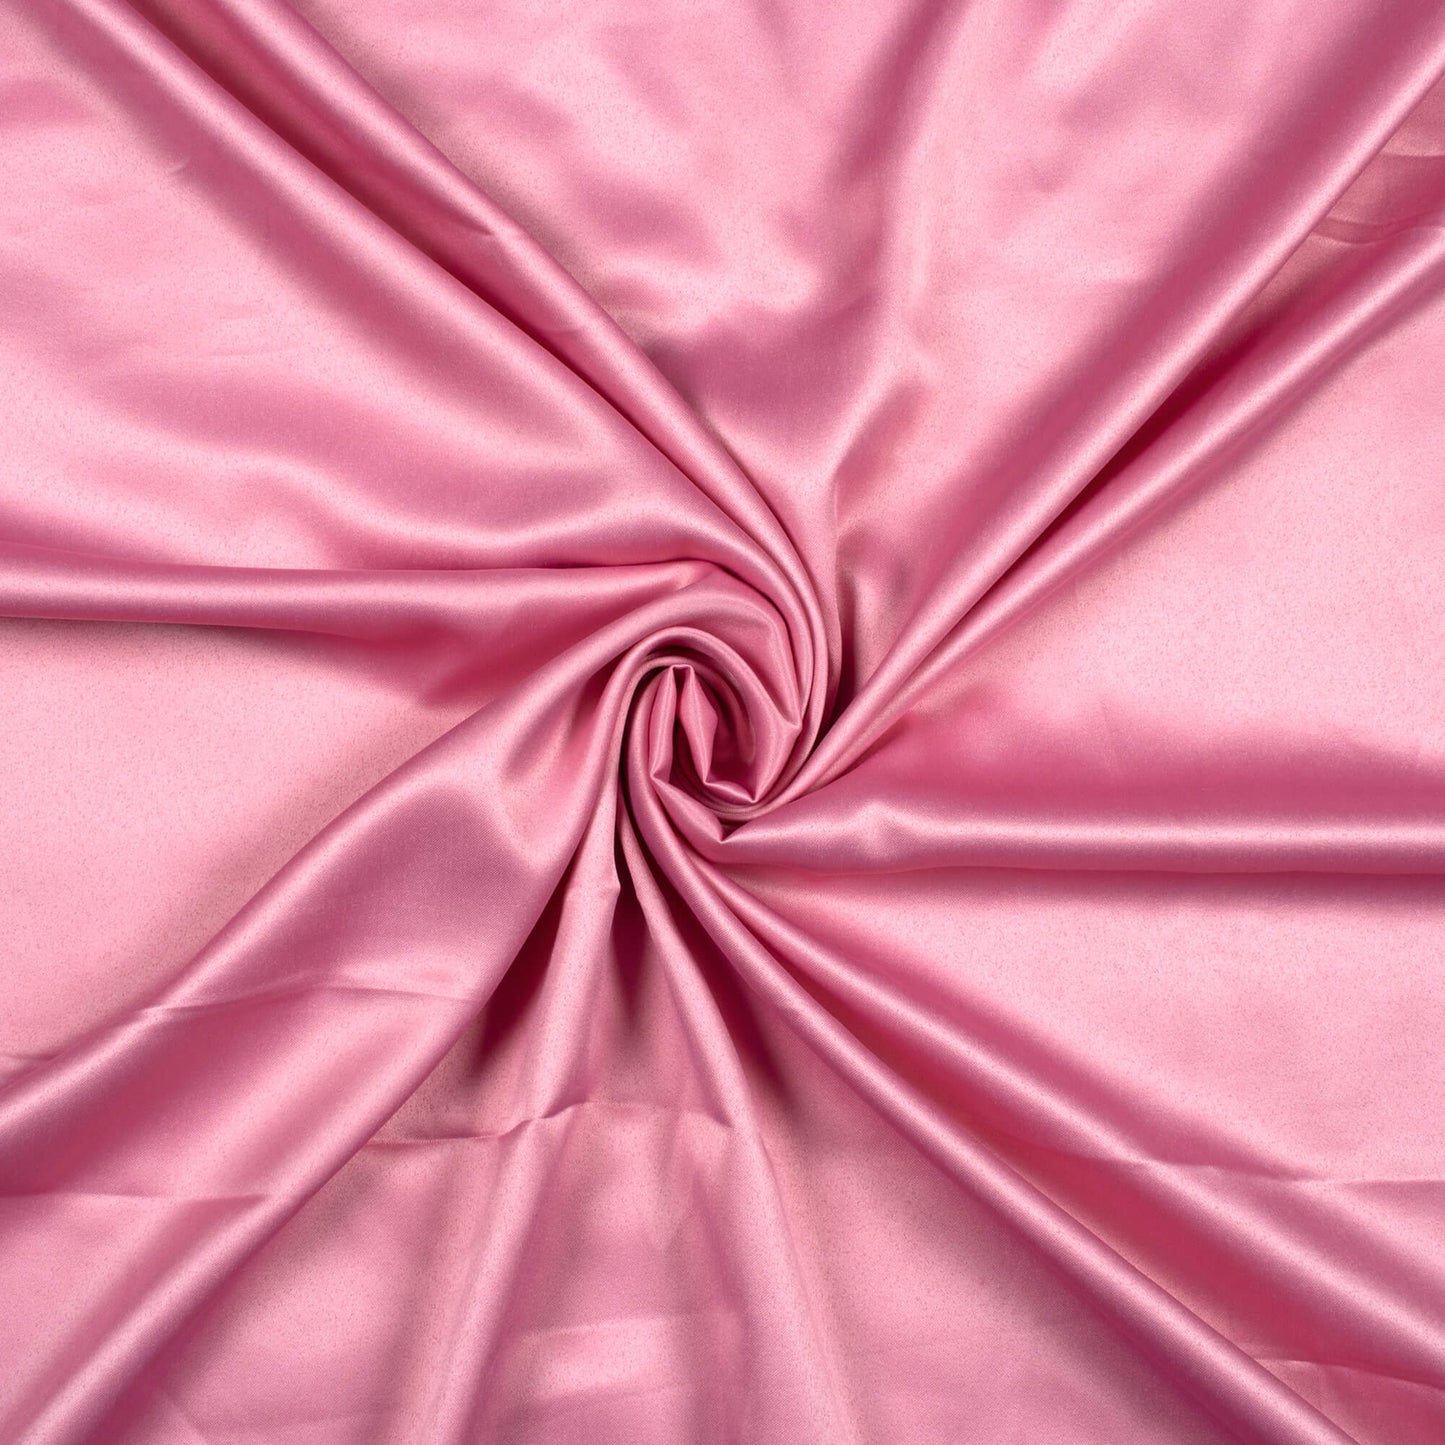 Hippie Pink Plain Charmeuse Satin Fabric (Width 58 Inches)